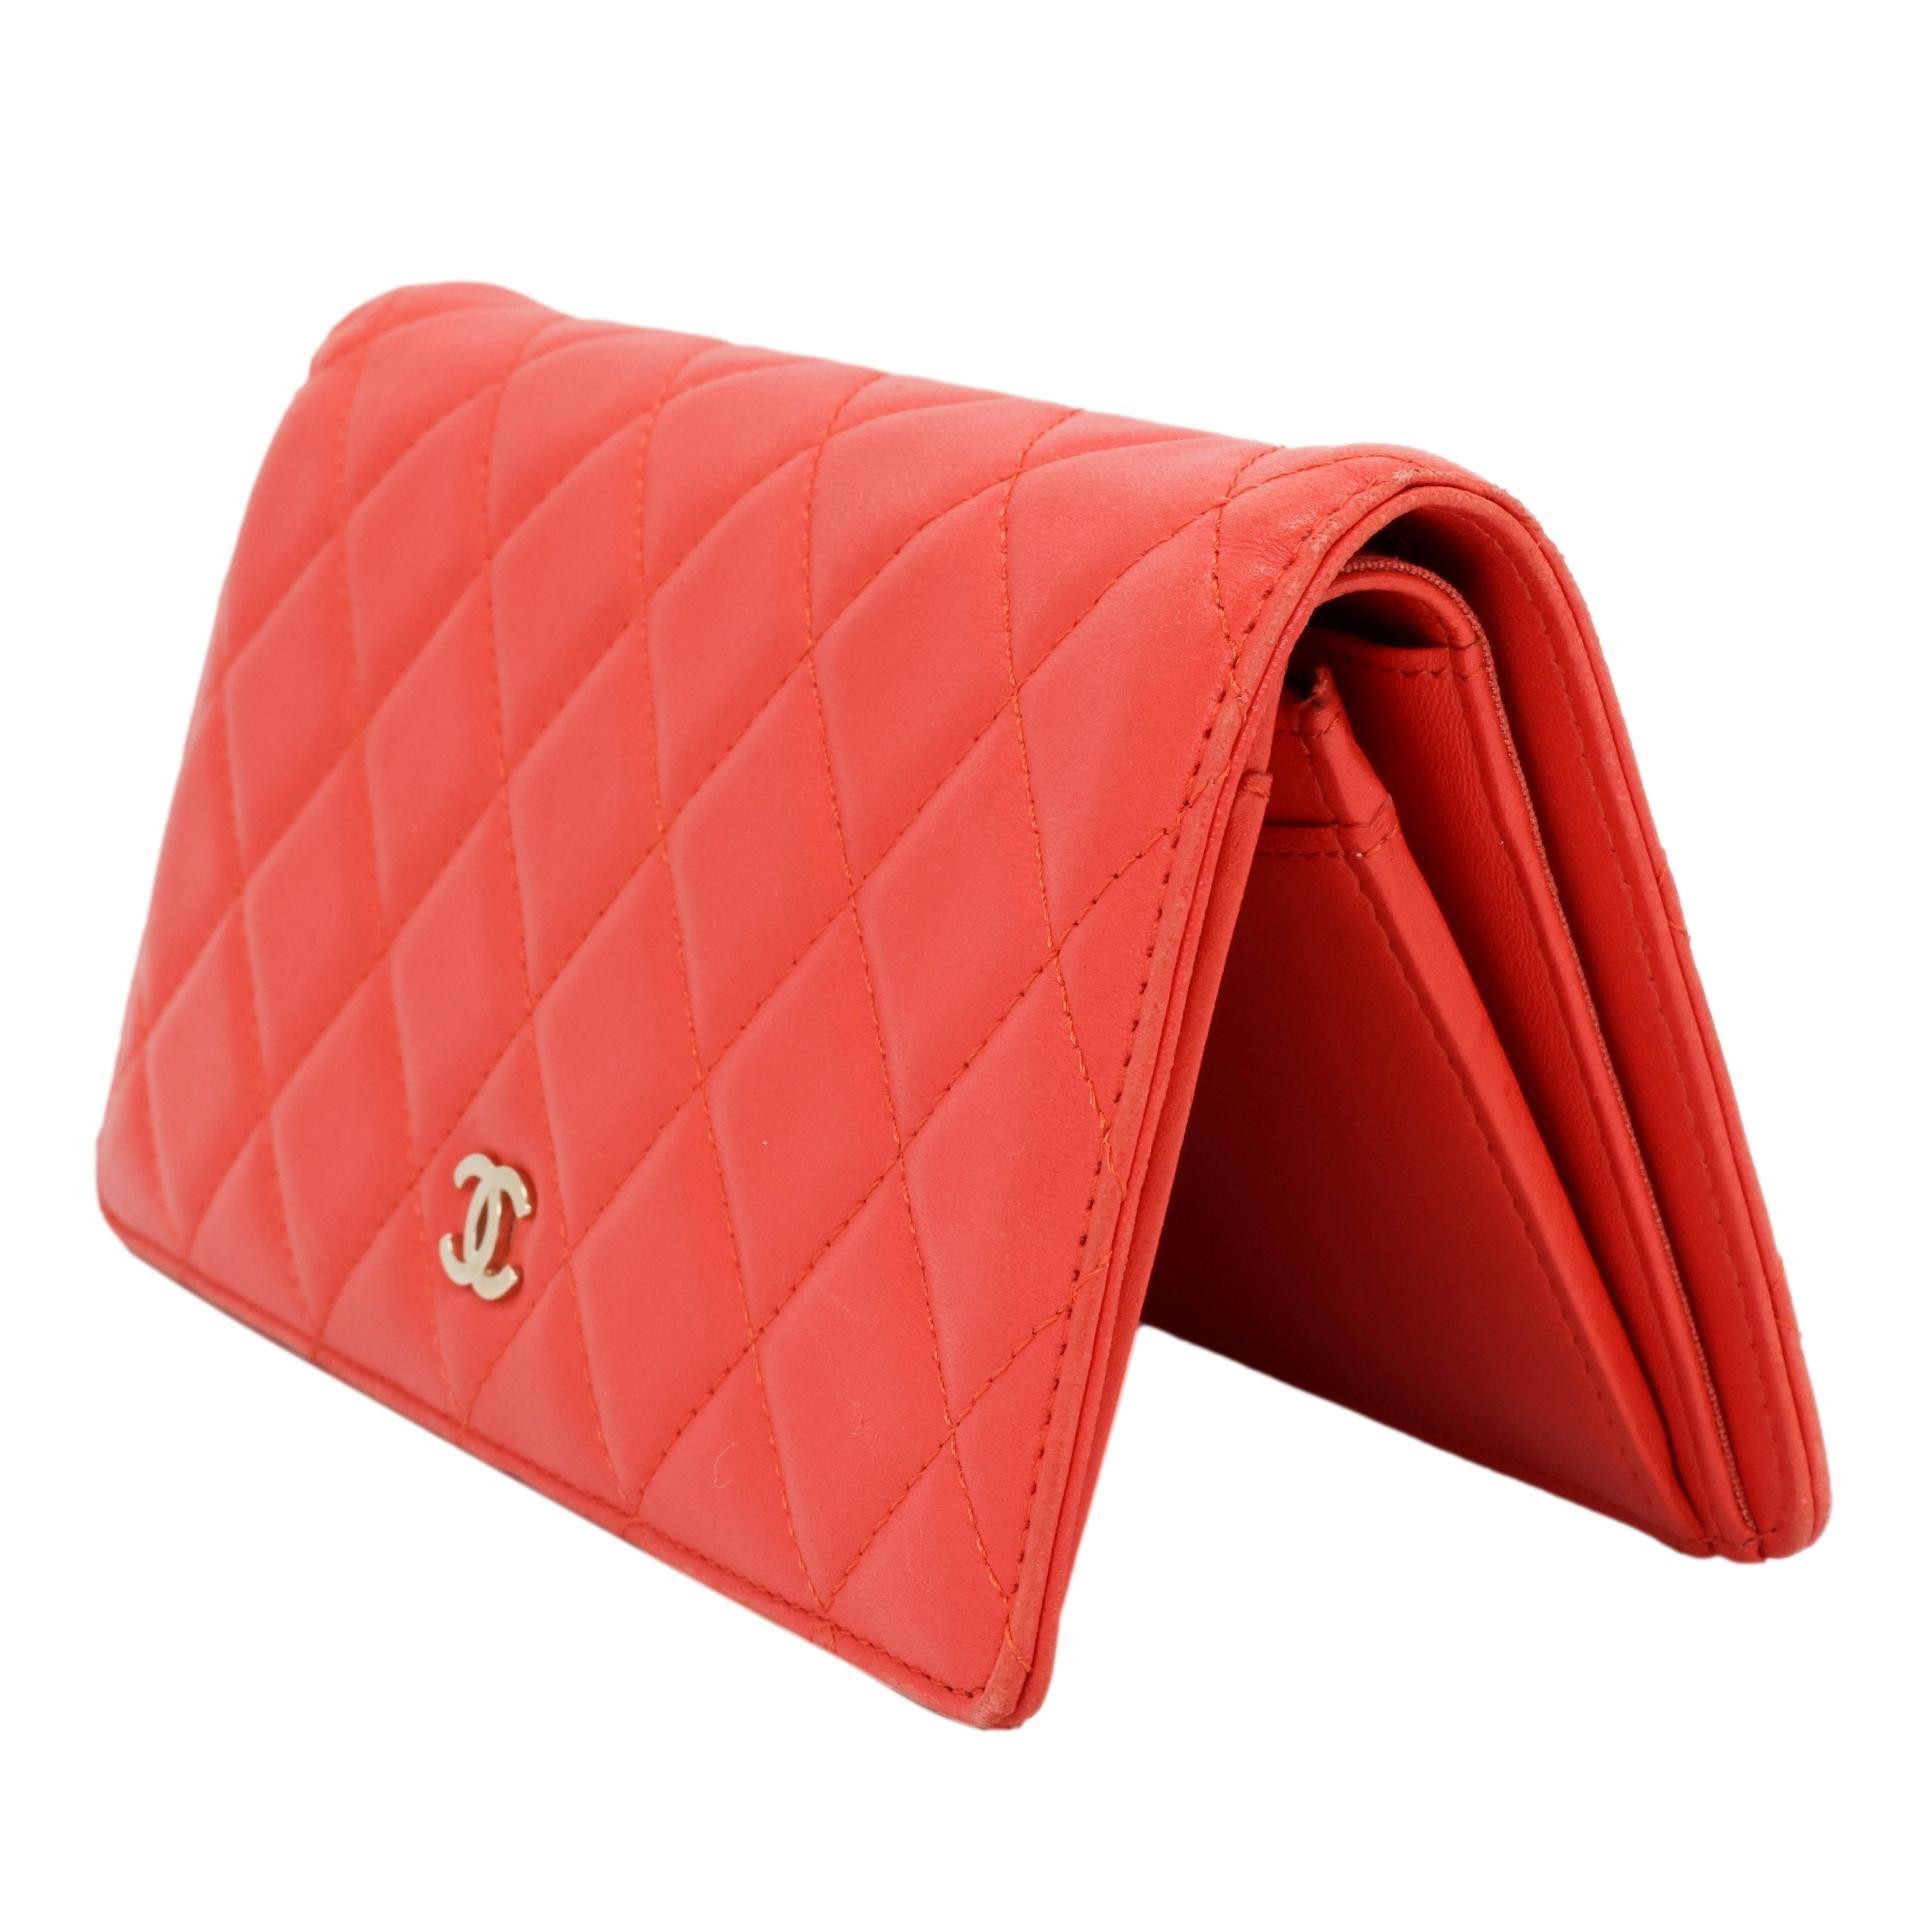 Women's or Men's Chanel Quilted Coral Lambskin Leather Yen Continental Wallet, 2009 - 2010.